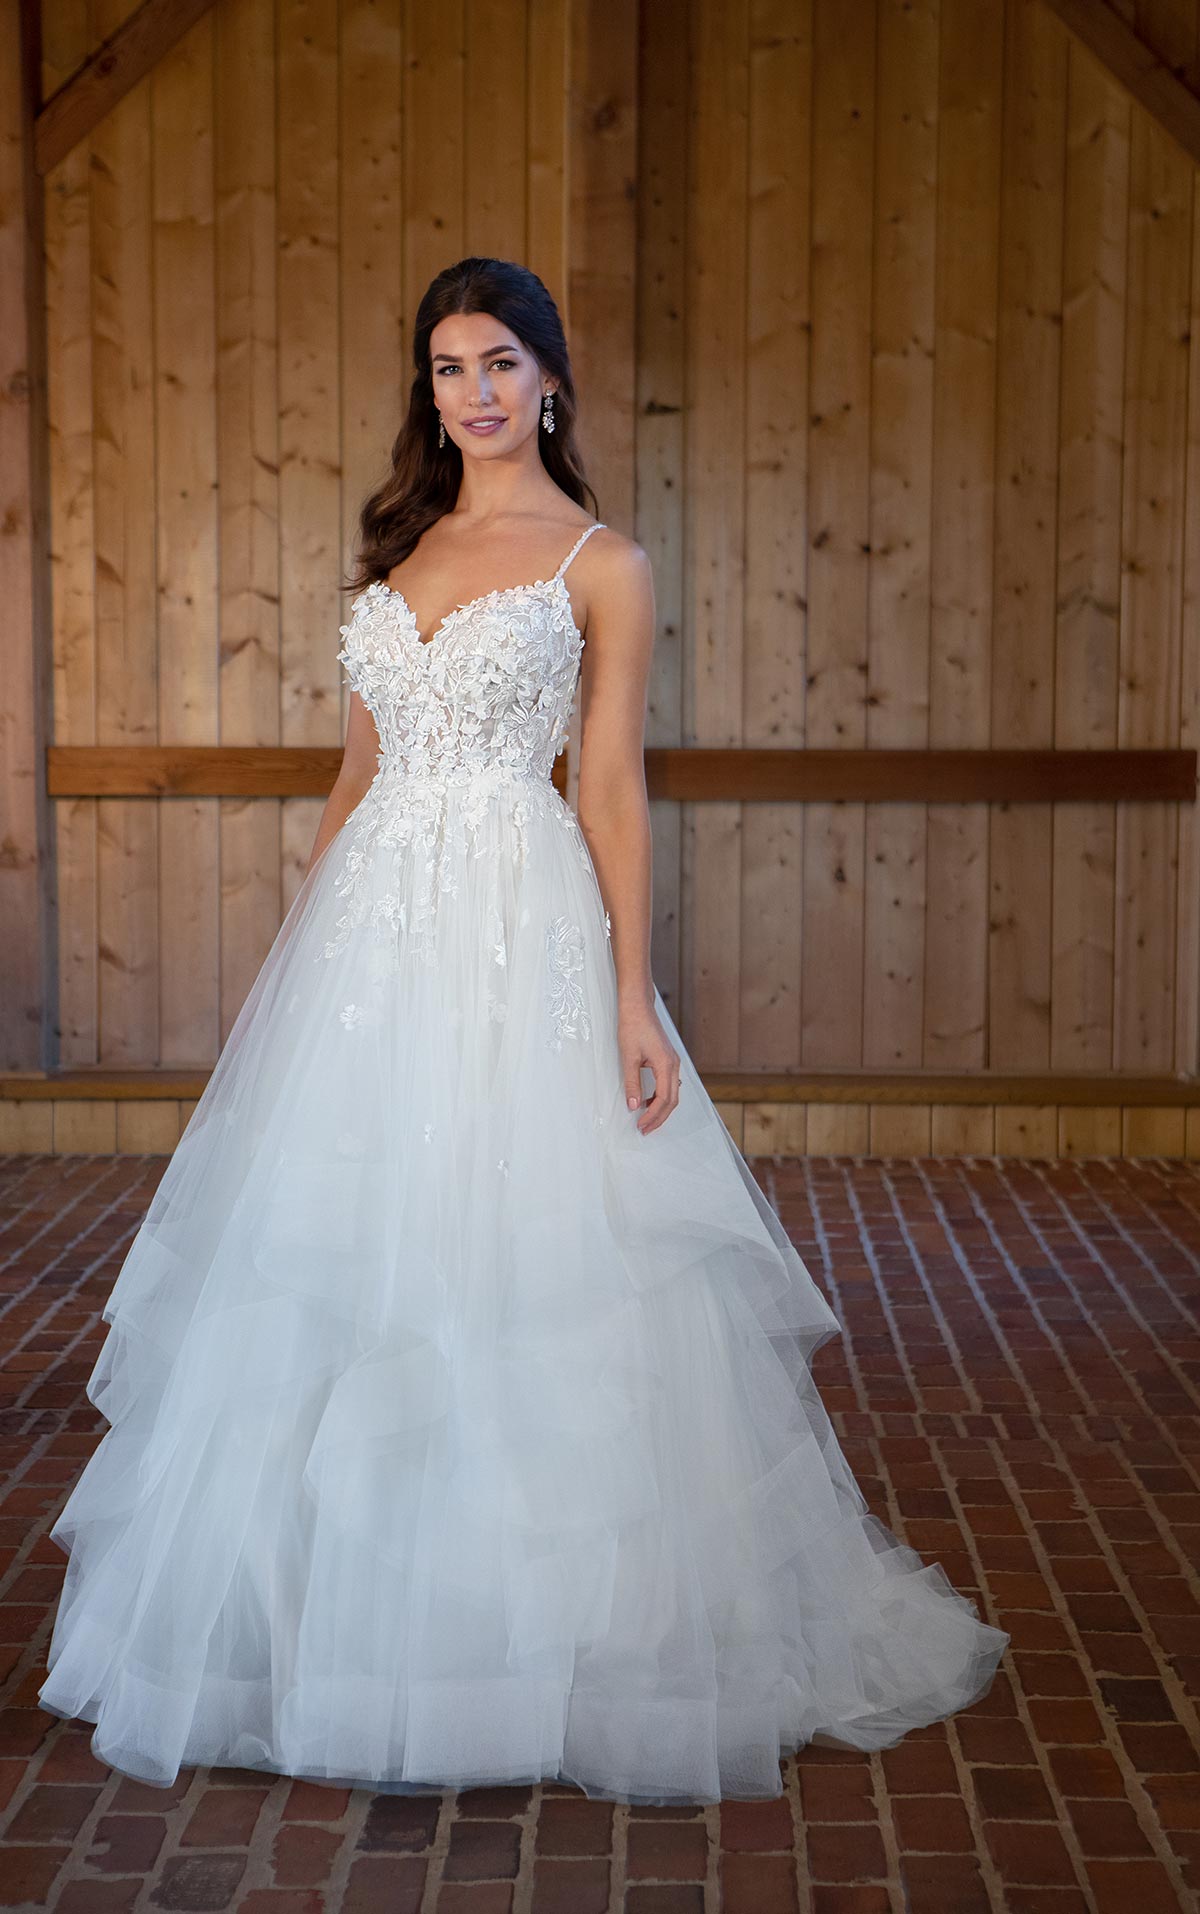 Tulle Ball Gown Wedding Dress With Sweetheart Neckline And Spaghetti Straps Kleinfeld Bridal